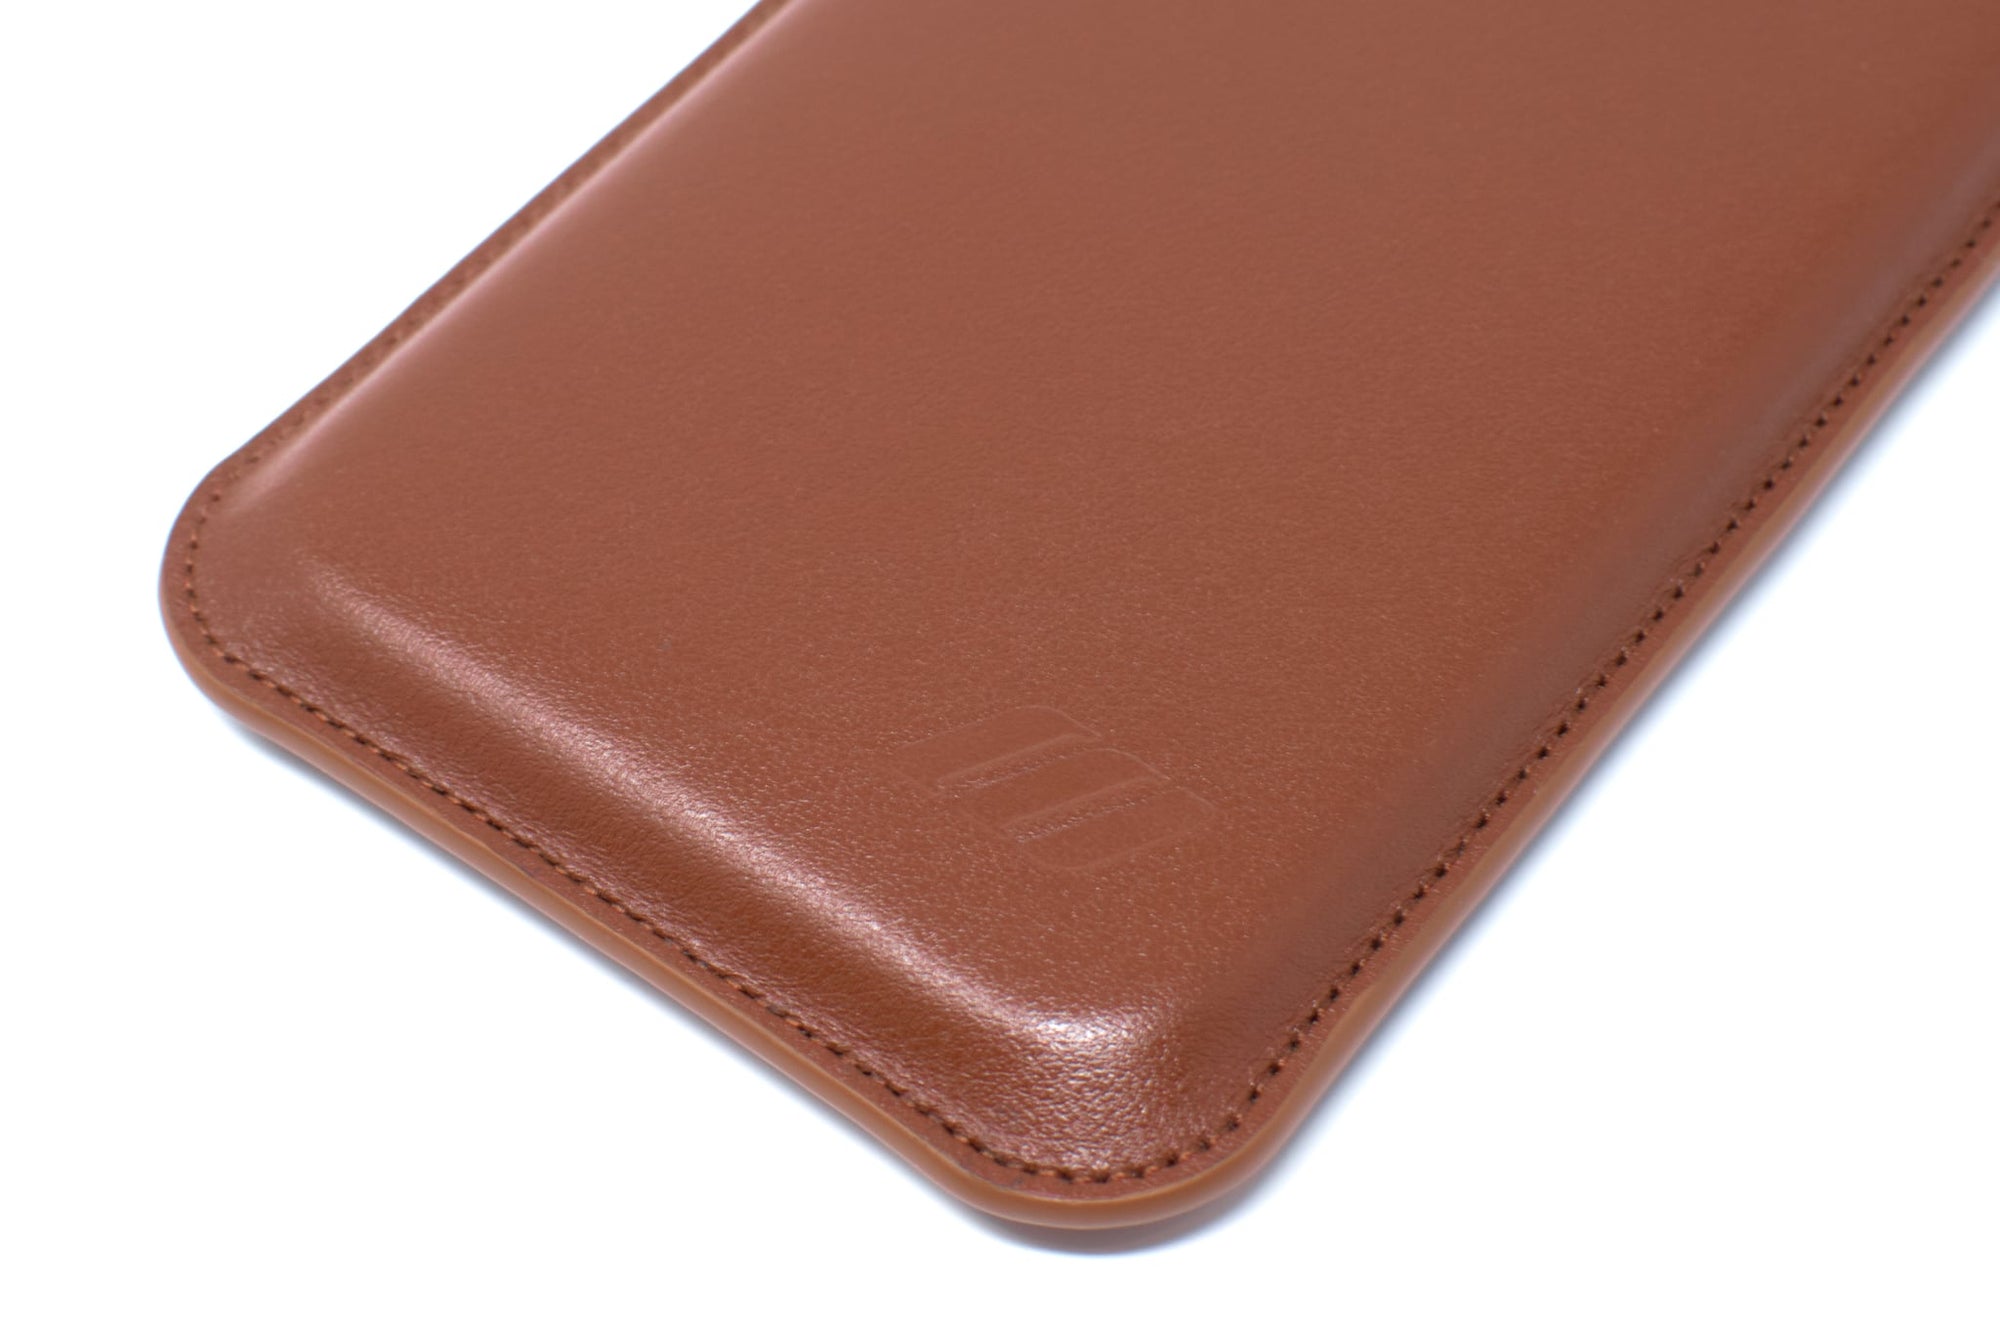 Apple iPhone 14 Pro Max Leather Sleeve Case - Skinny Fit - Acorn Brown